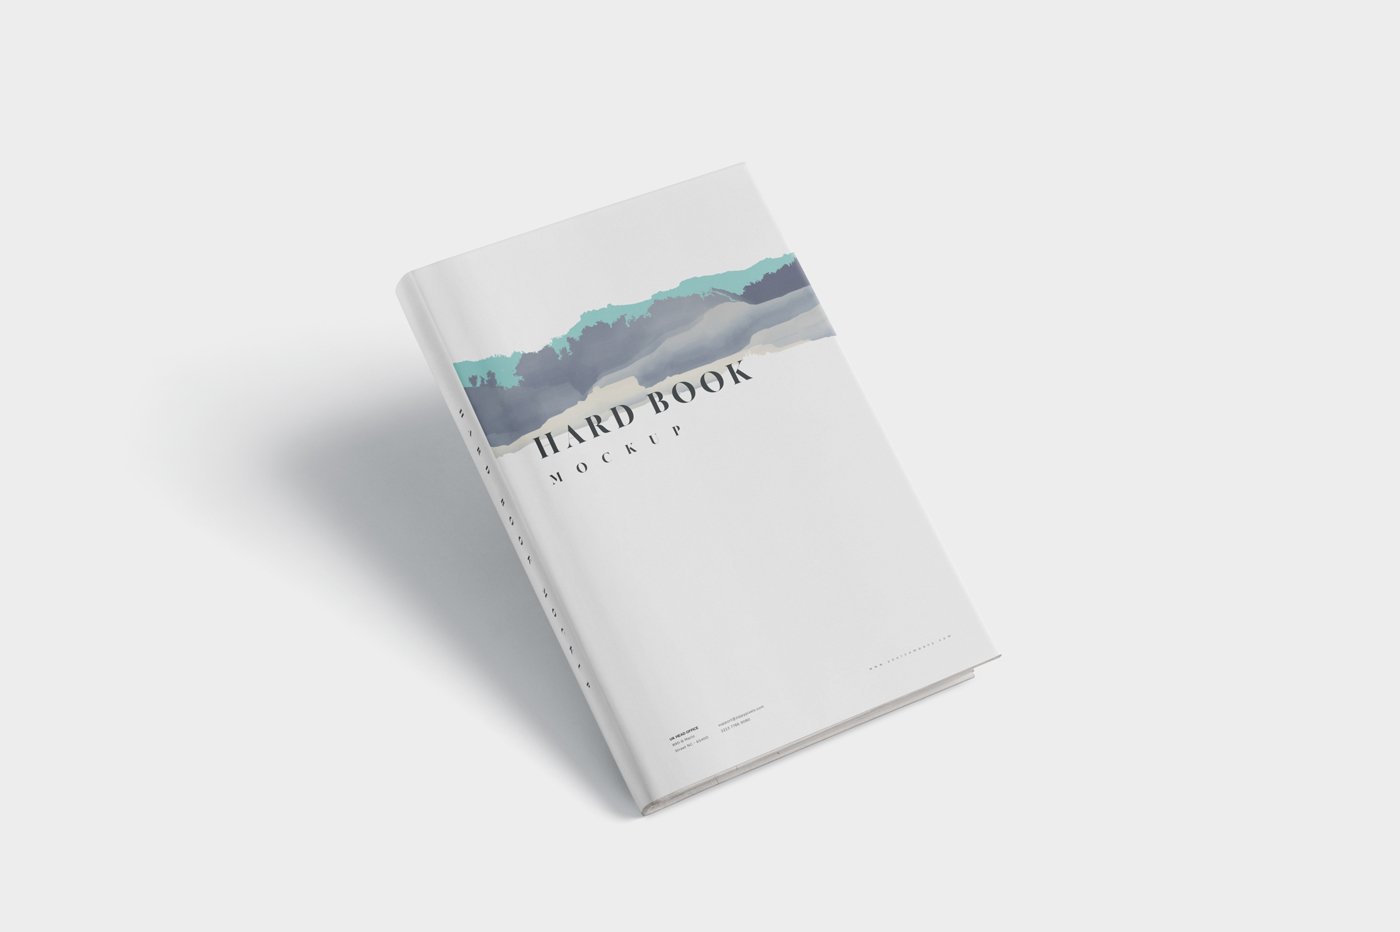 Light book cover with the small horizontal illustration.